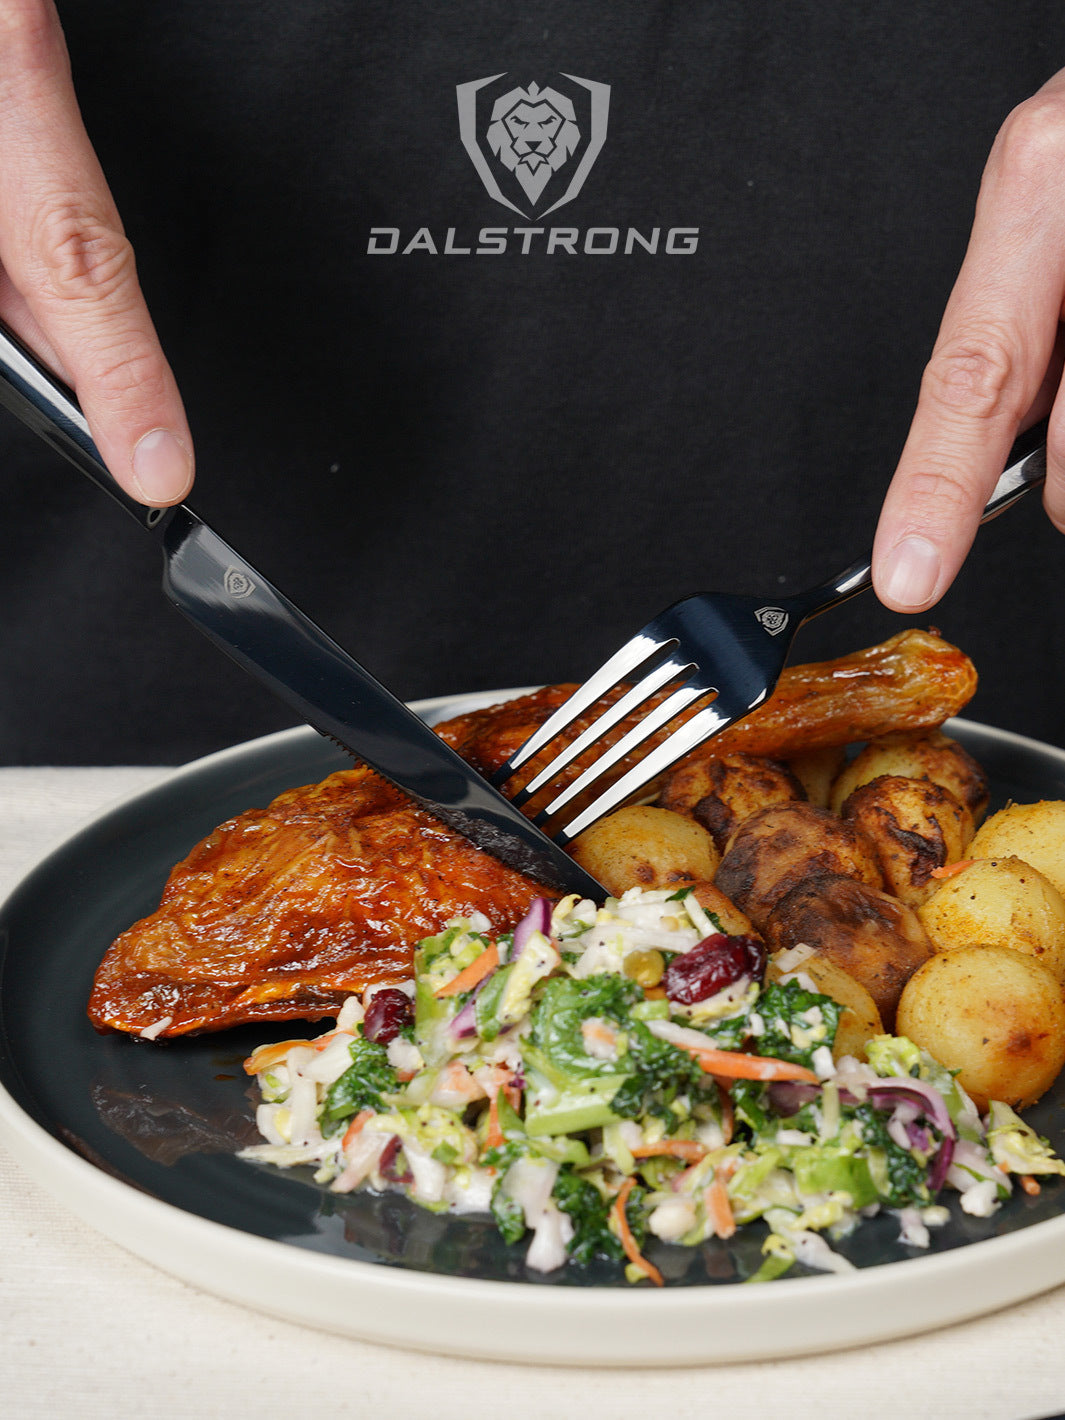 Dalstrong 20 piece flatware cutlery set black stainless steel service of 4 with a cooked chicken and potato in a plate.